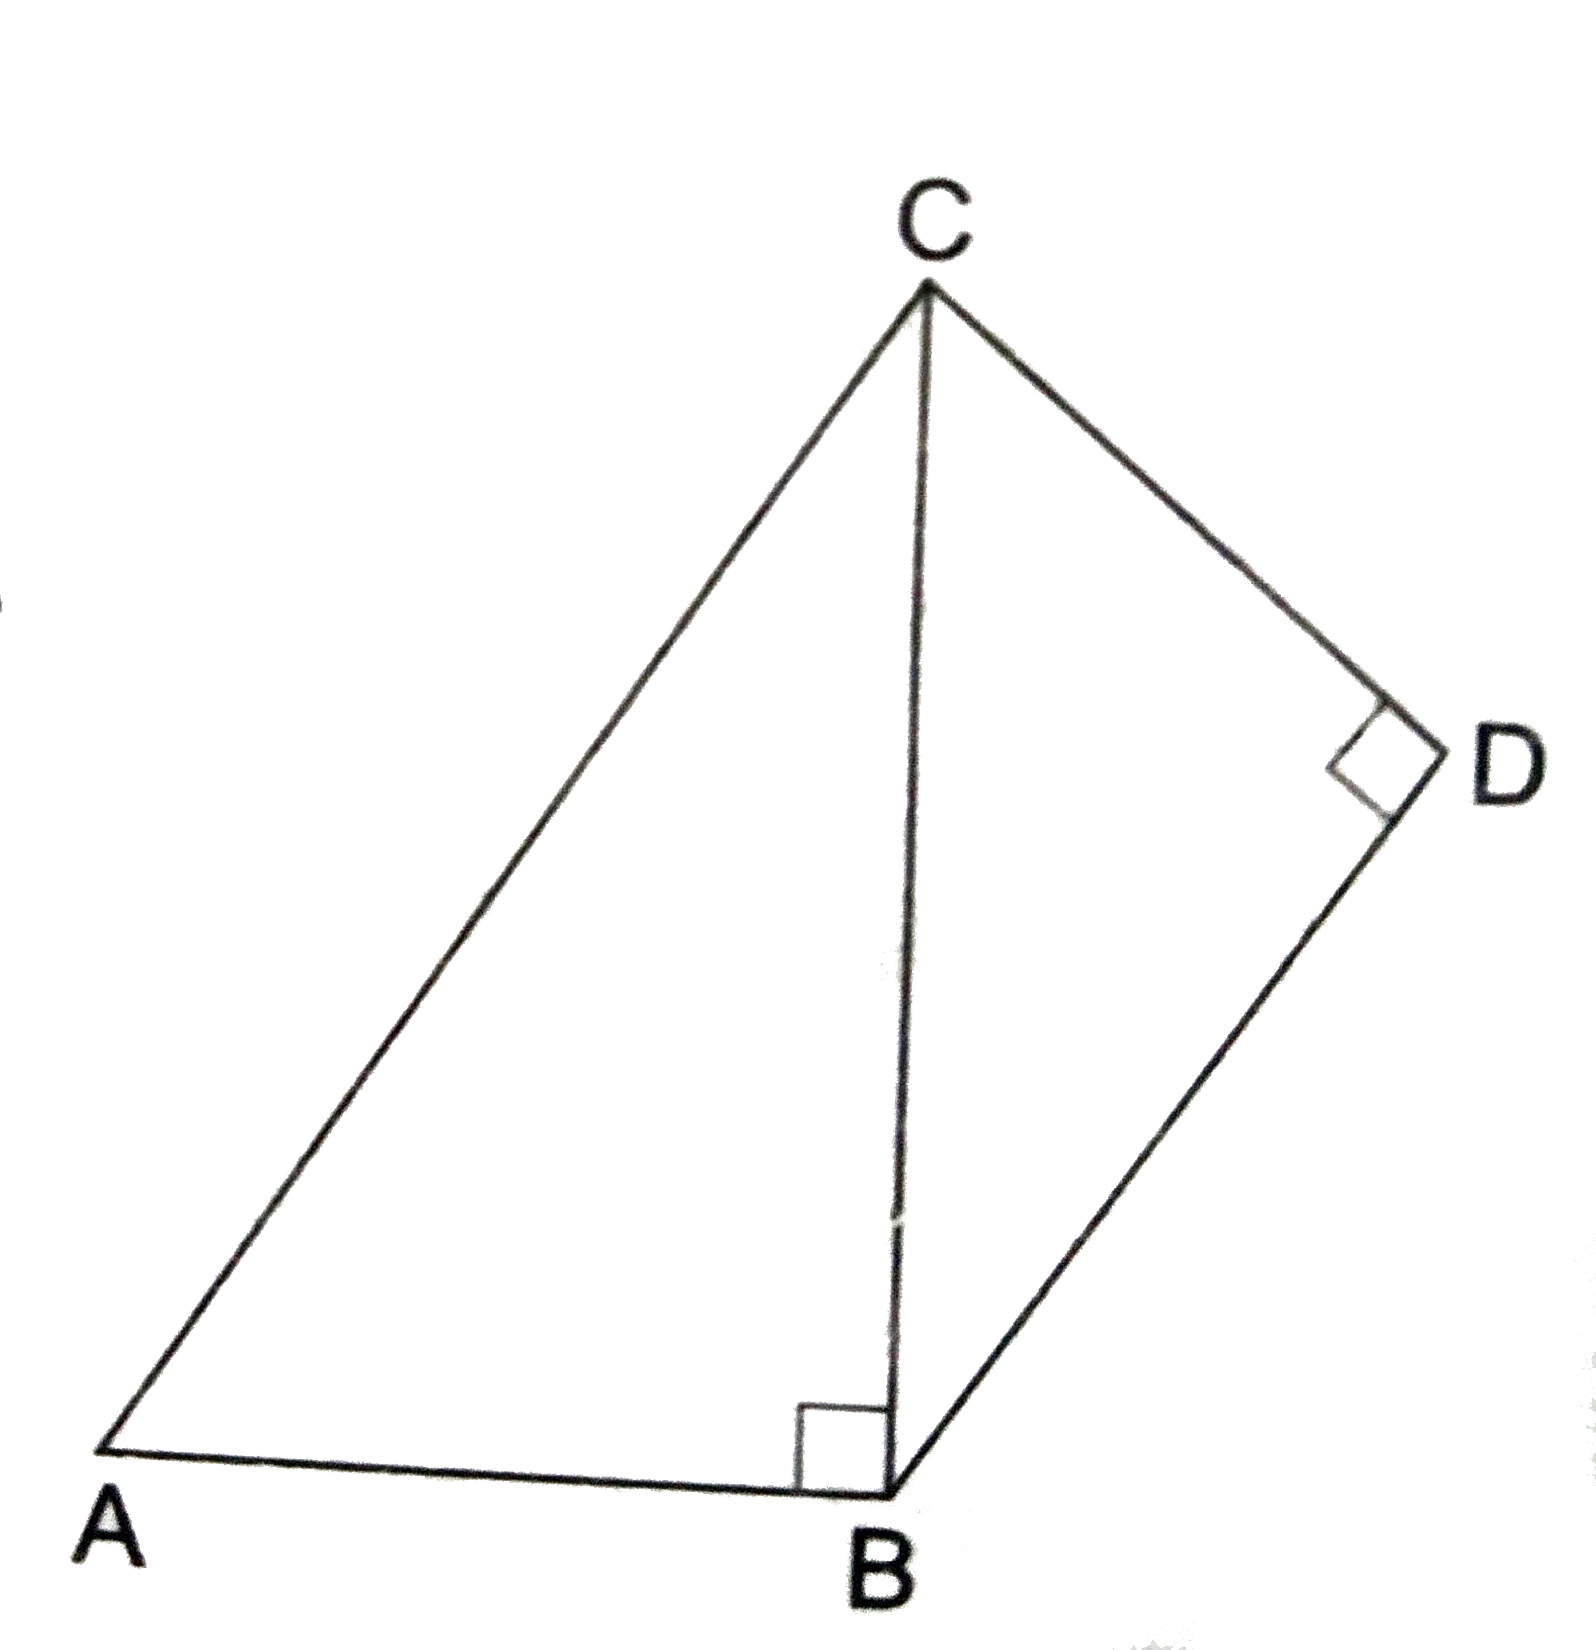 In the  given  figure  ABCD is a quadrilateral in  which  angle ABC=90^(@),angle BDC=90^(@),AC=17 cm ,BC=15 cm ,BD=12 cm  and CD=9 cm . The area of quad. ABDC is